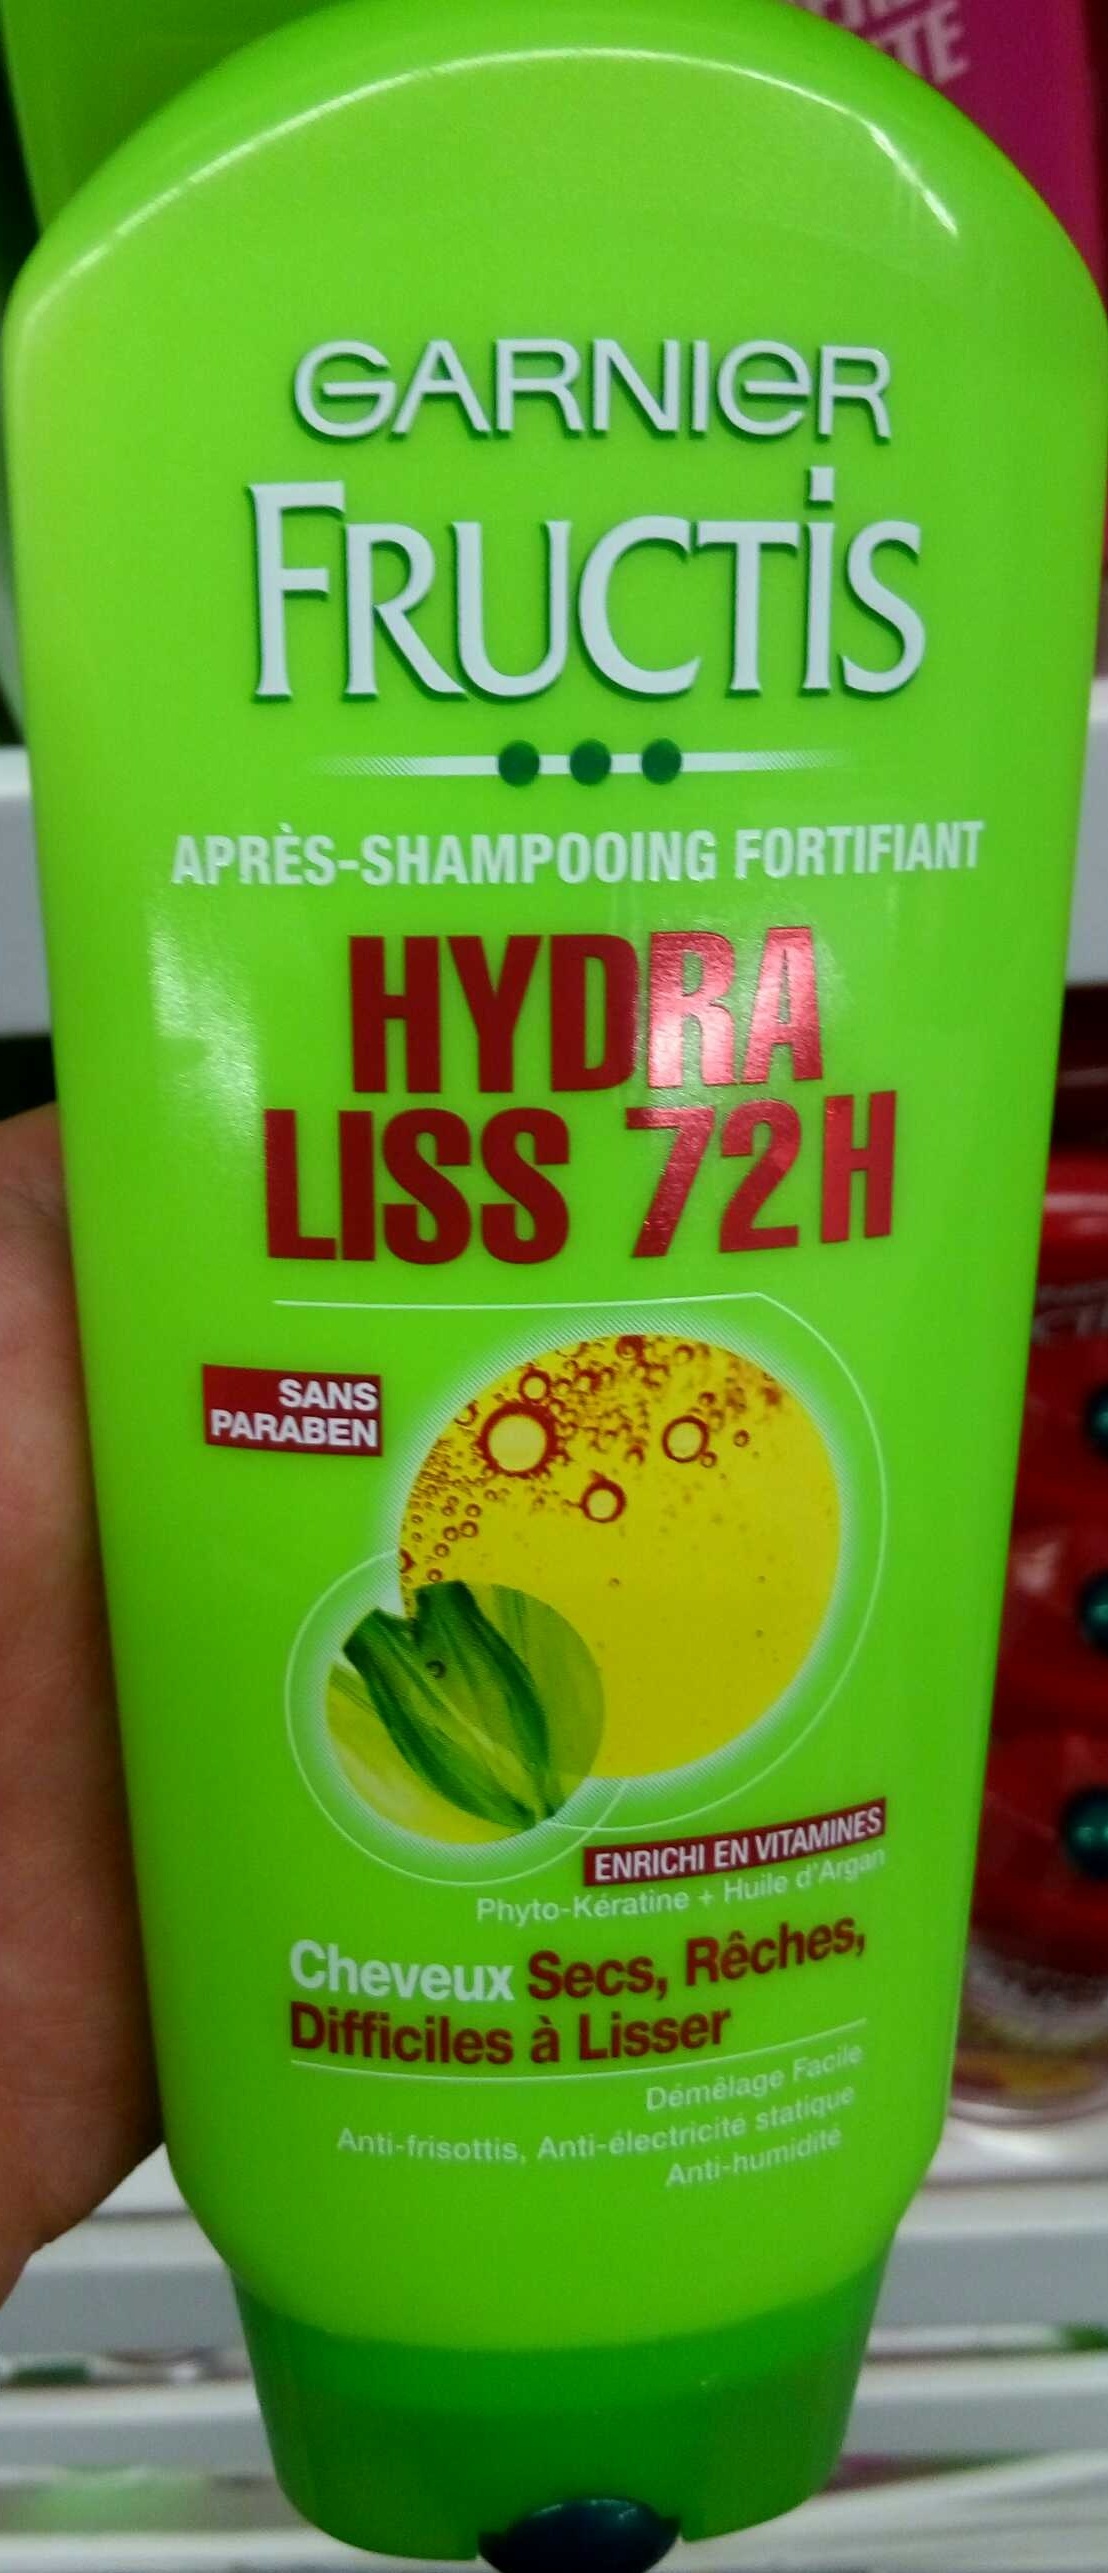 Après-shampooing fortifiant Hydra Liss 72H - Product - fr